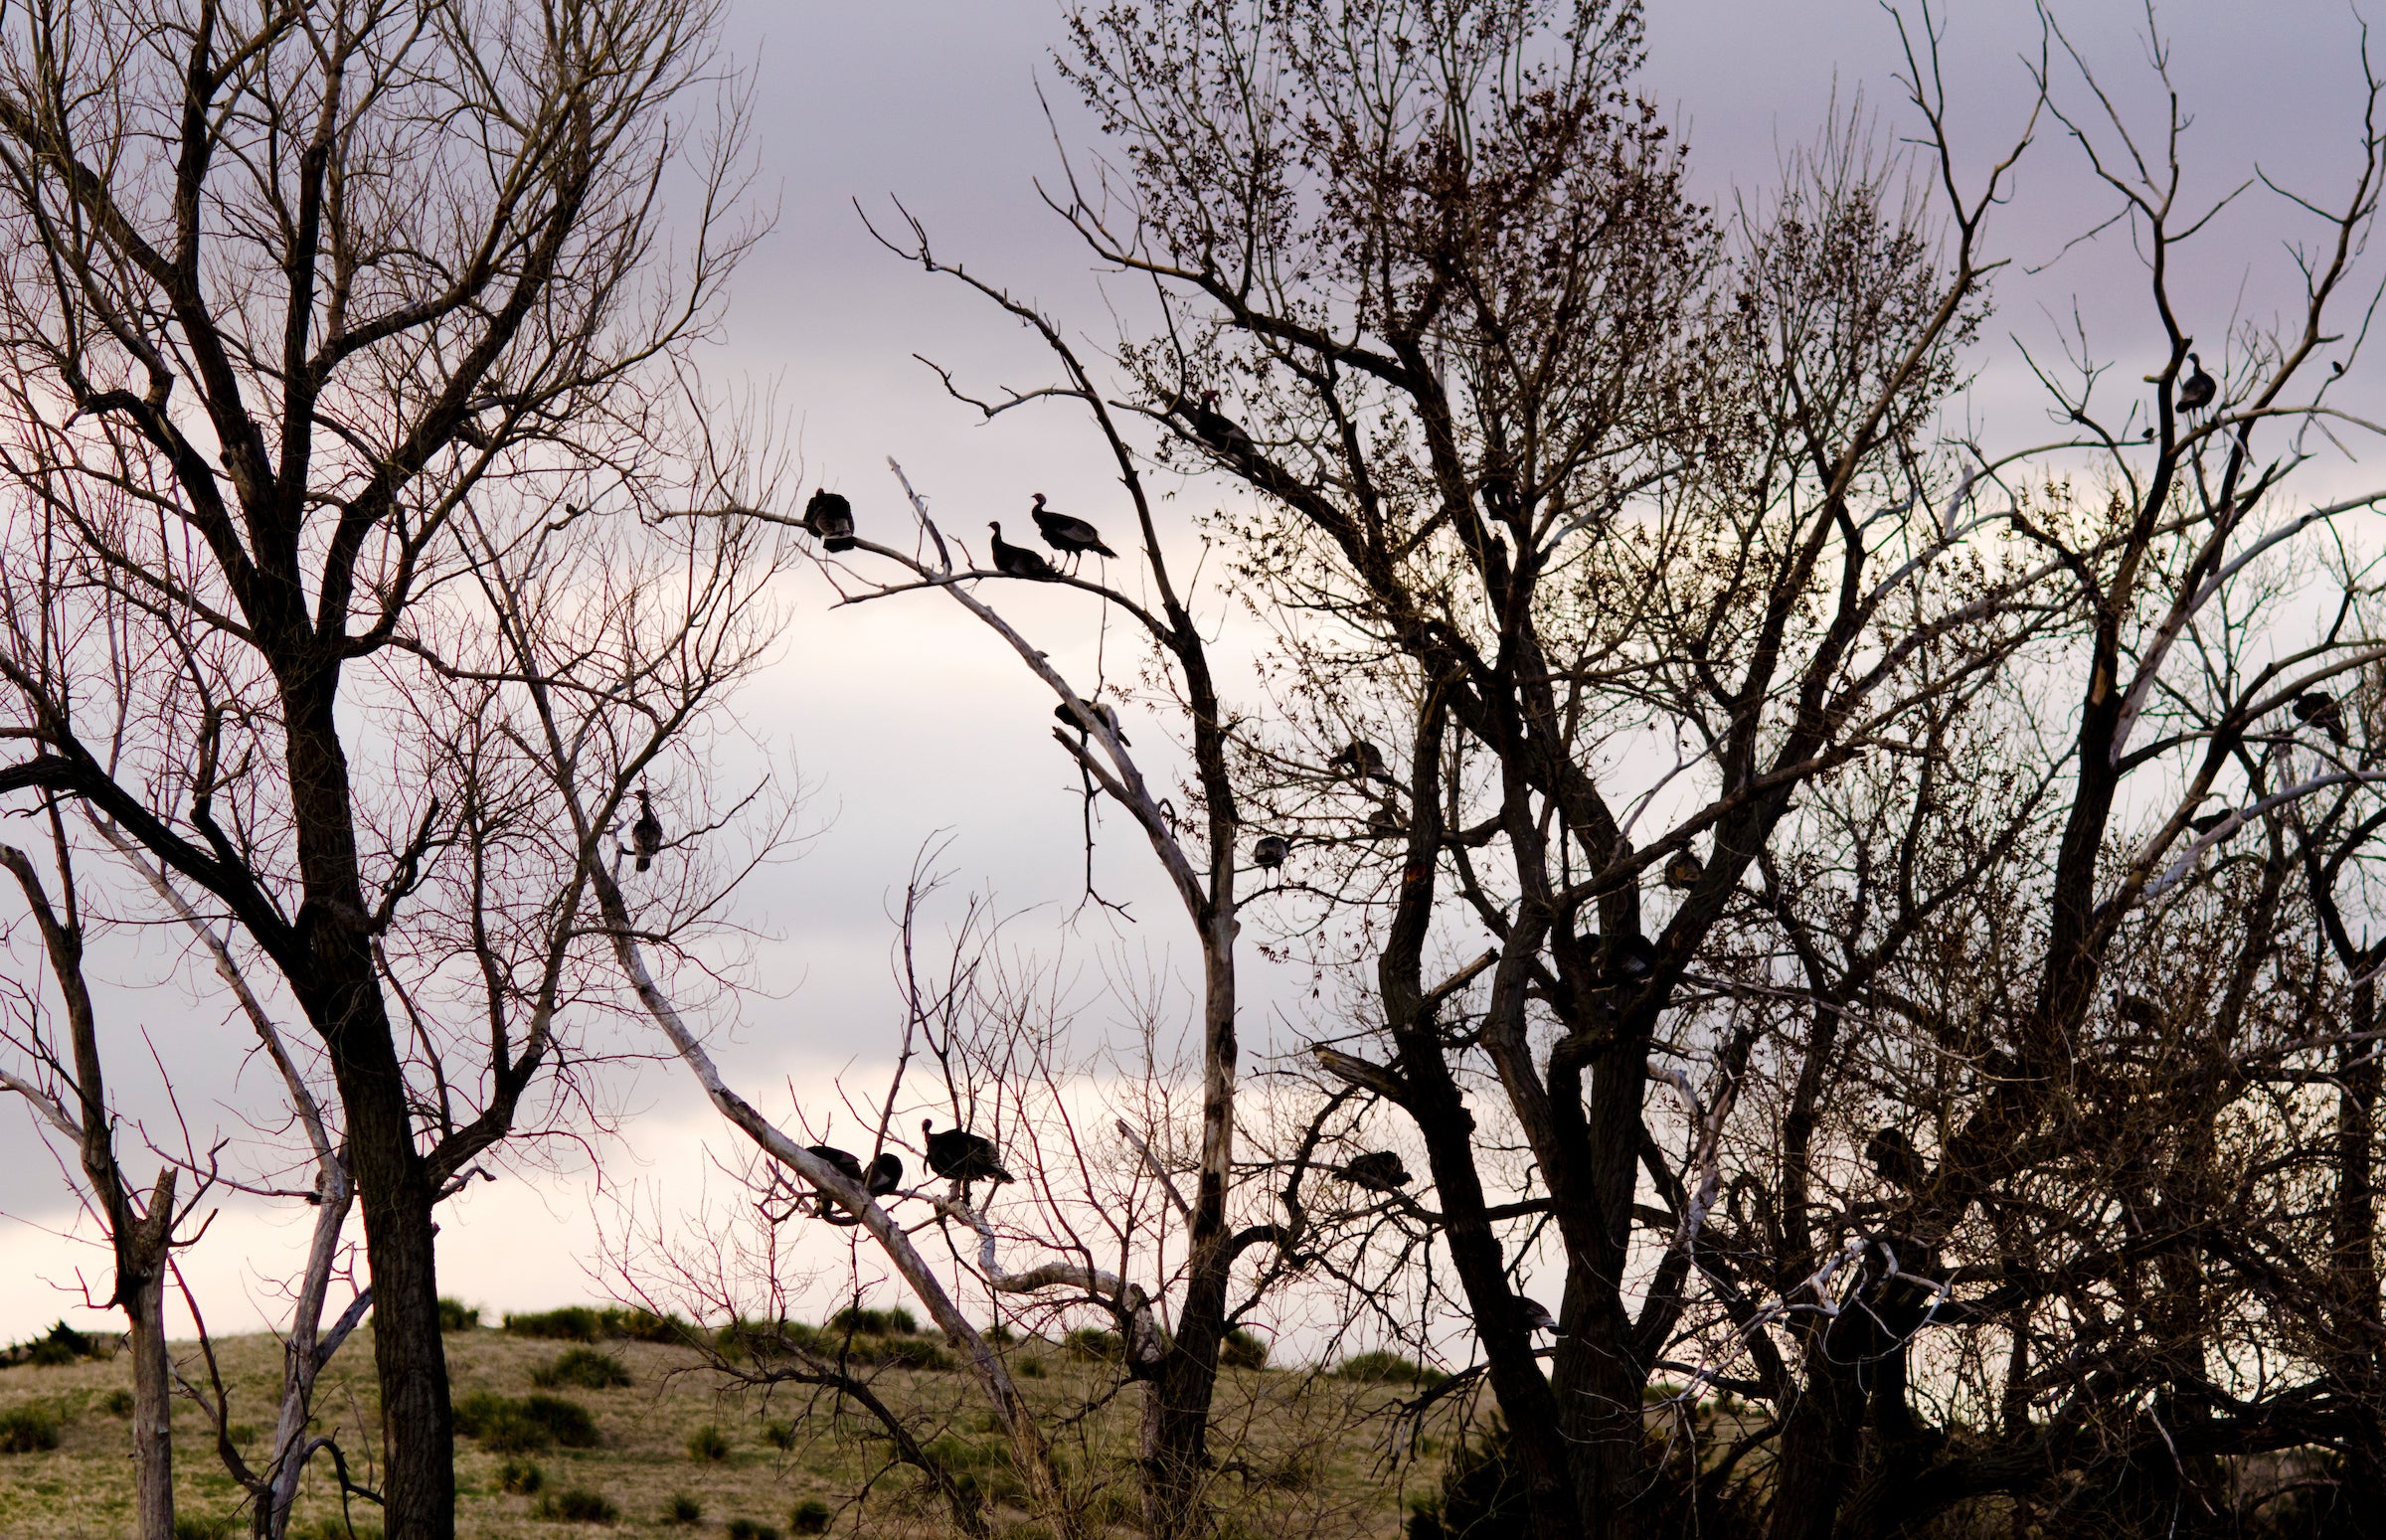 Turkeys roosted in the line of trees along a field at dawn.